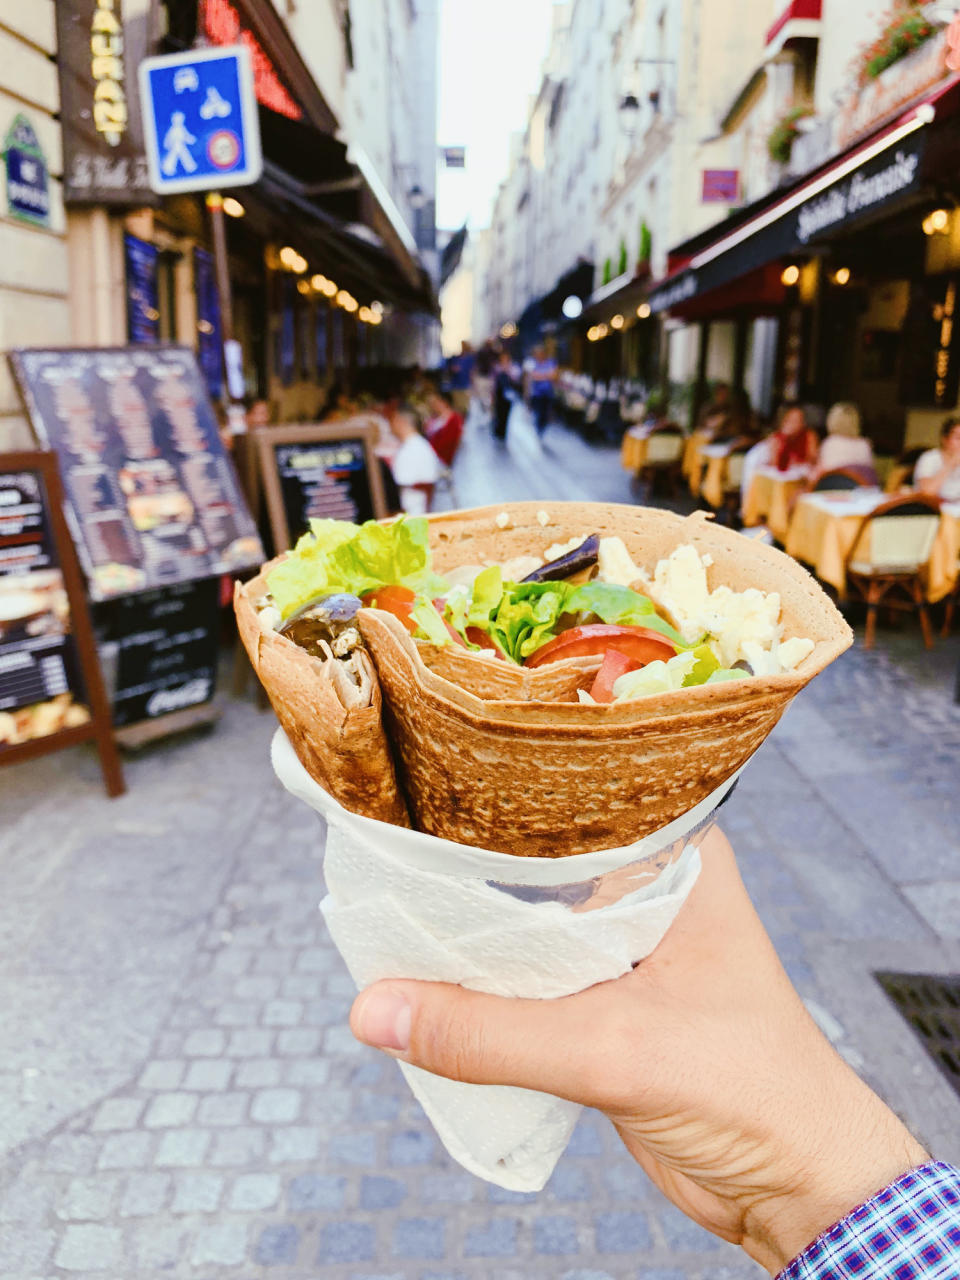 A crepe on the street